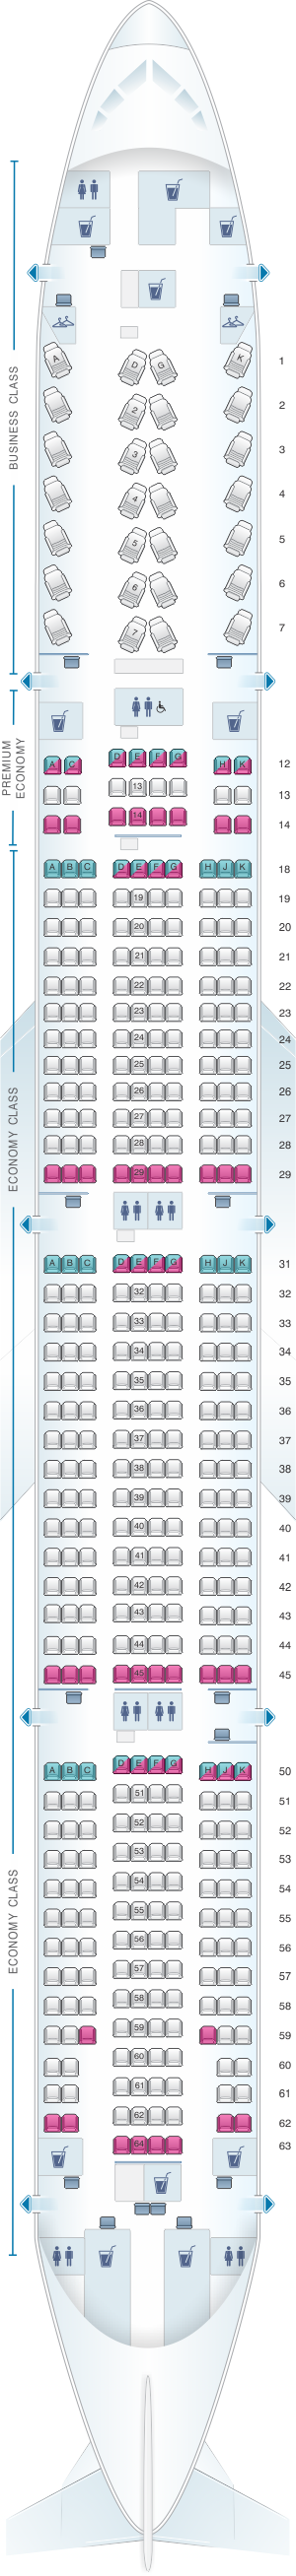 Air Boeing 777 Seating Chart